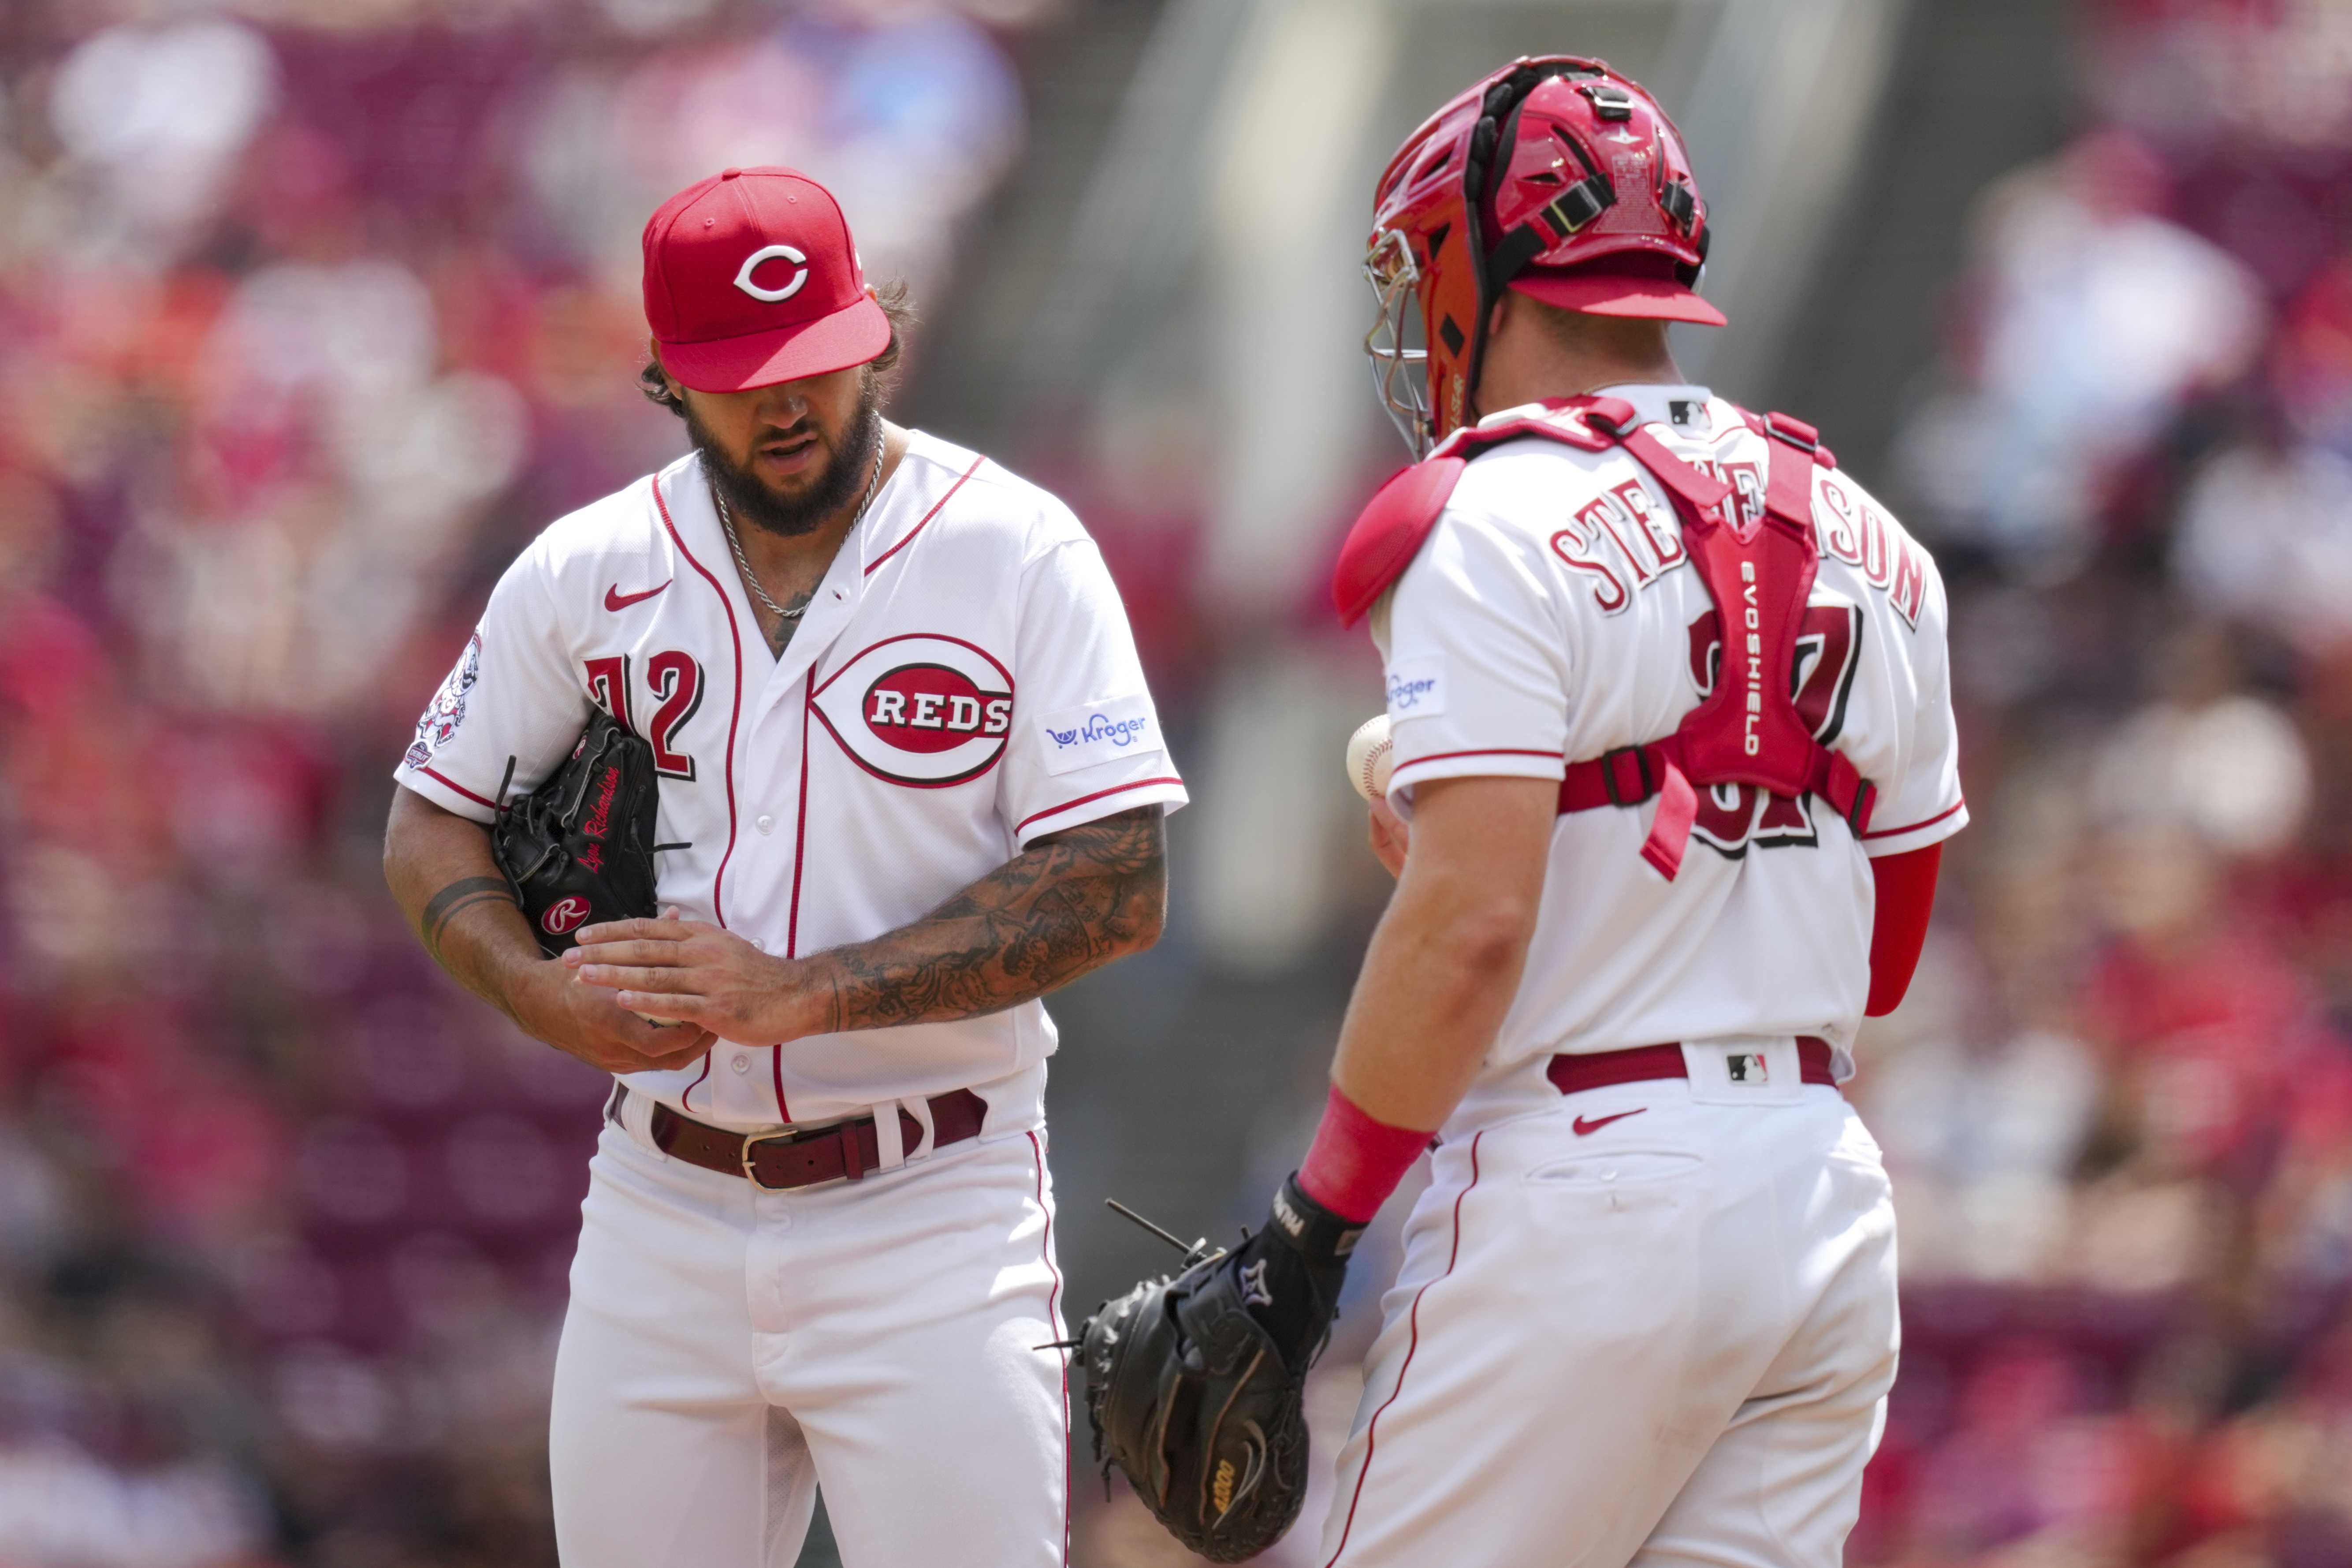 Matt Harvey Reds GABP debut 5 years after Sports Illustrated cover